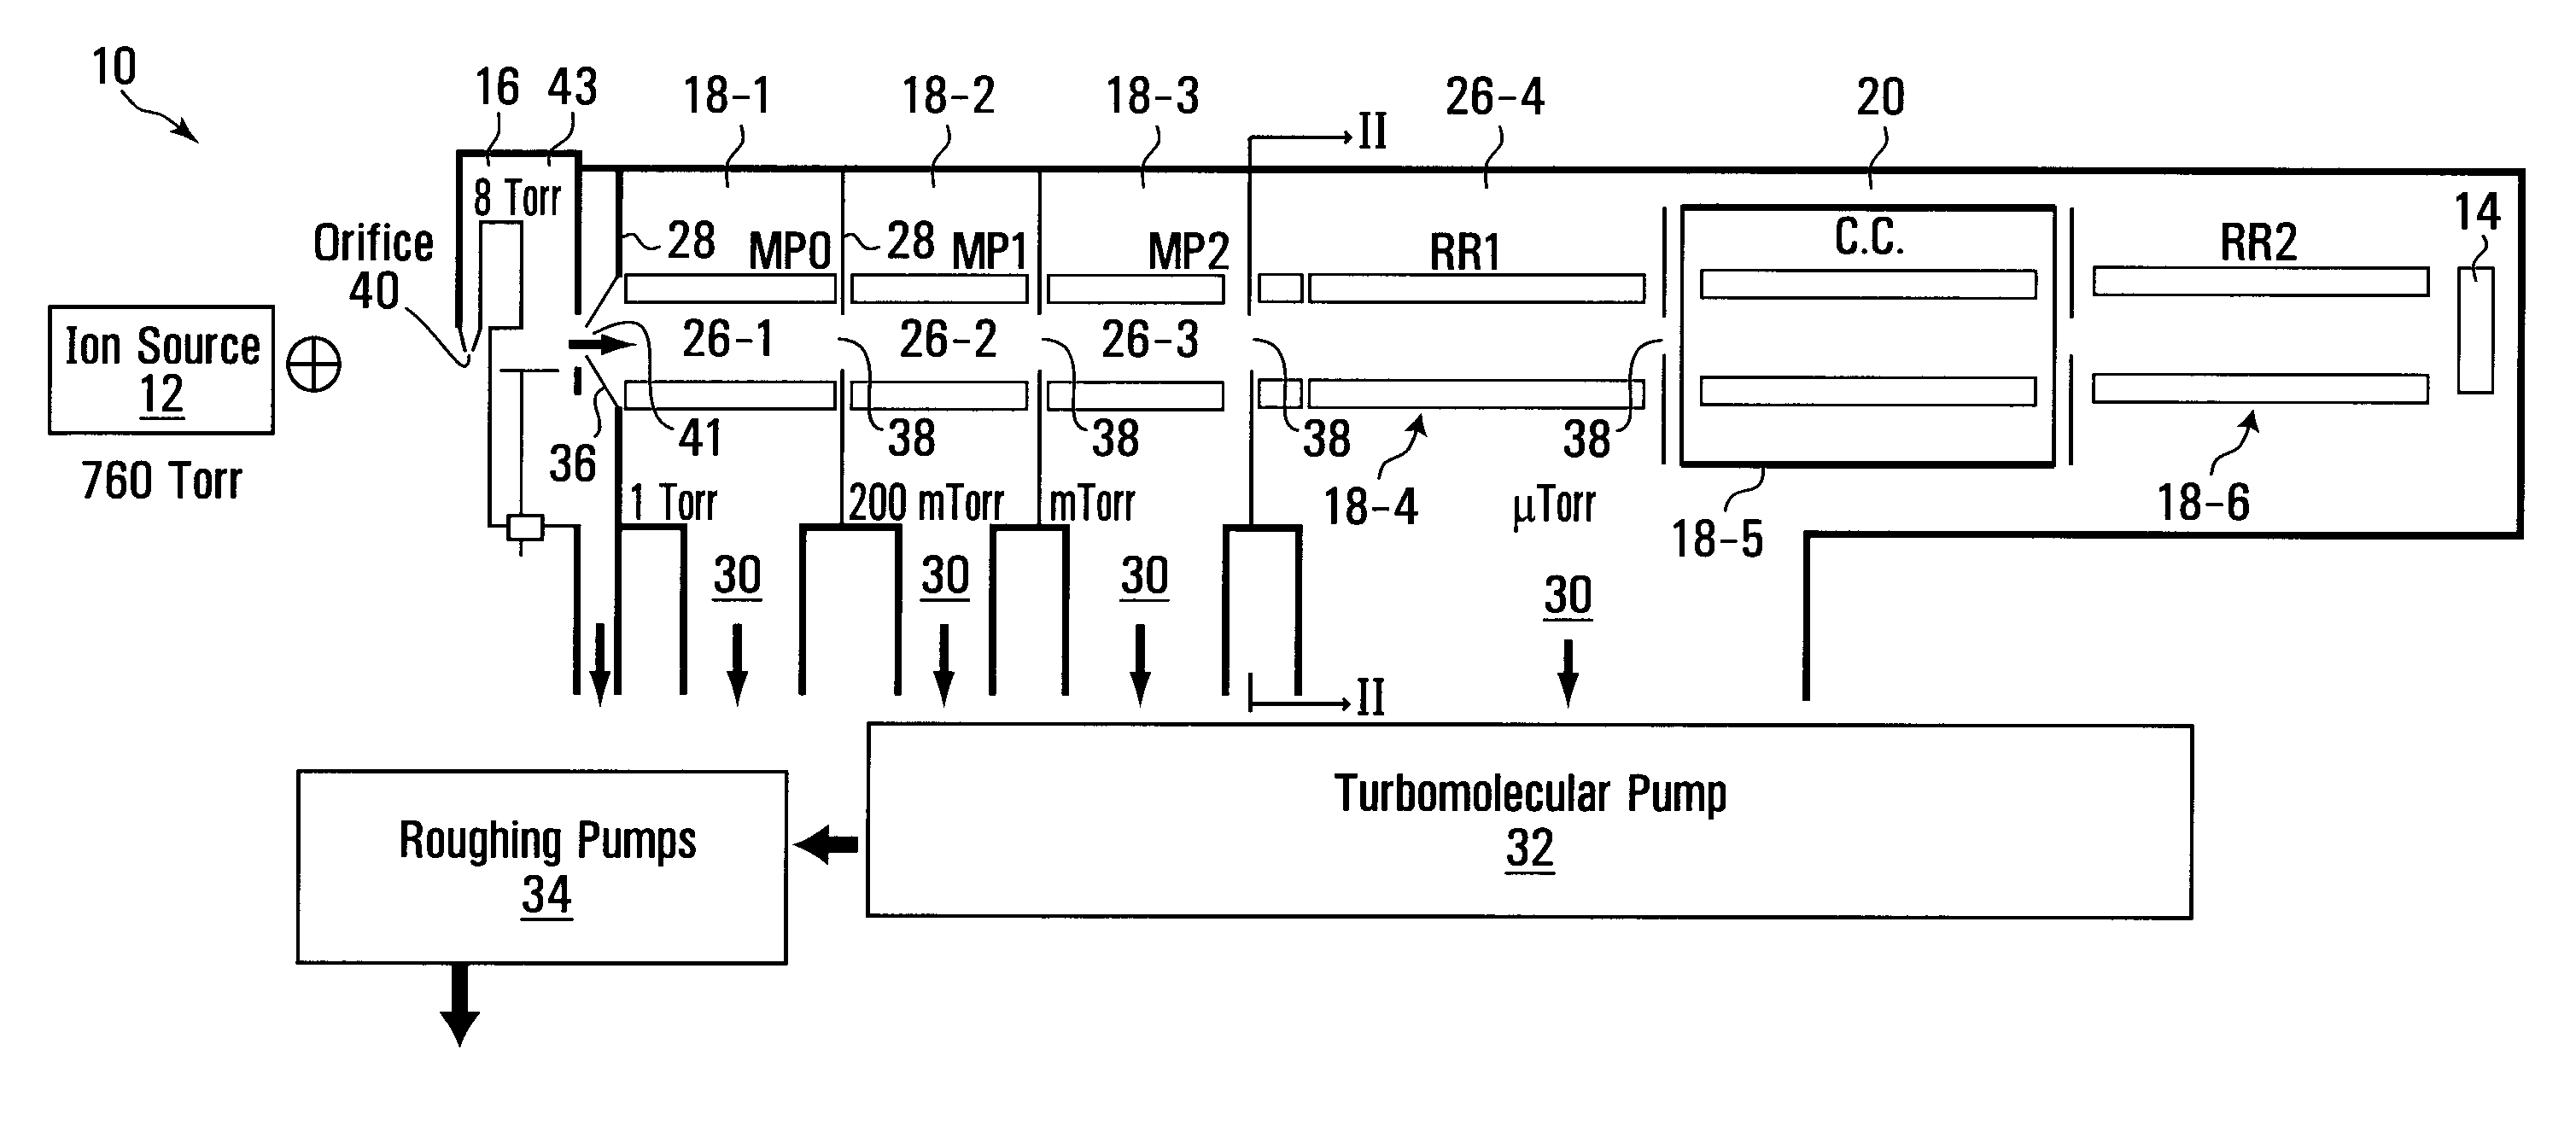 Multi-pressure stage mass spectrometer and methods